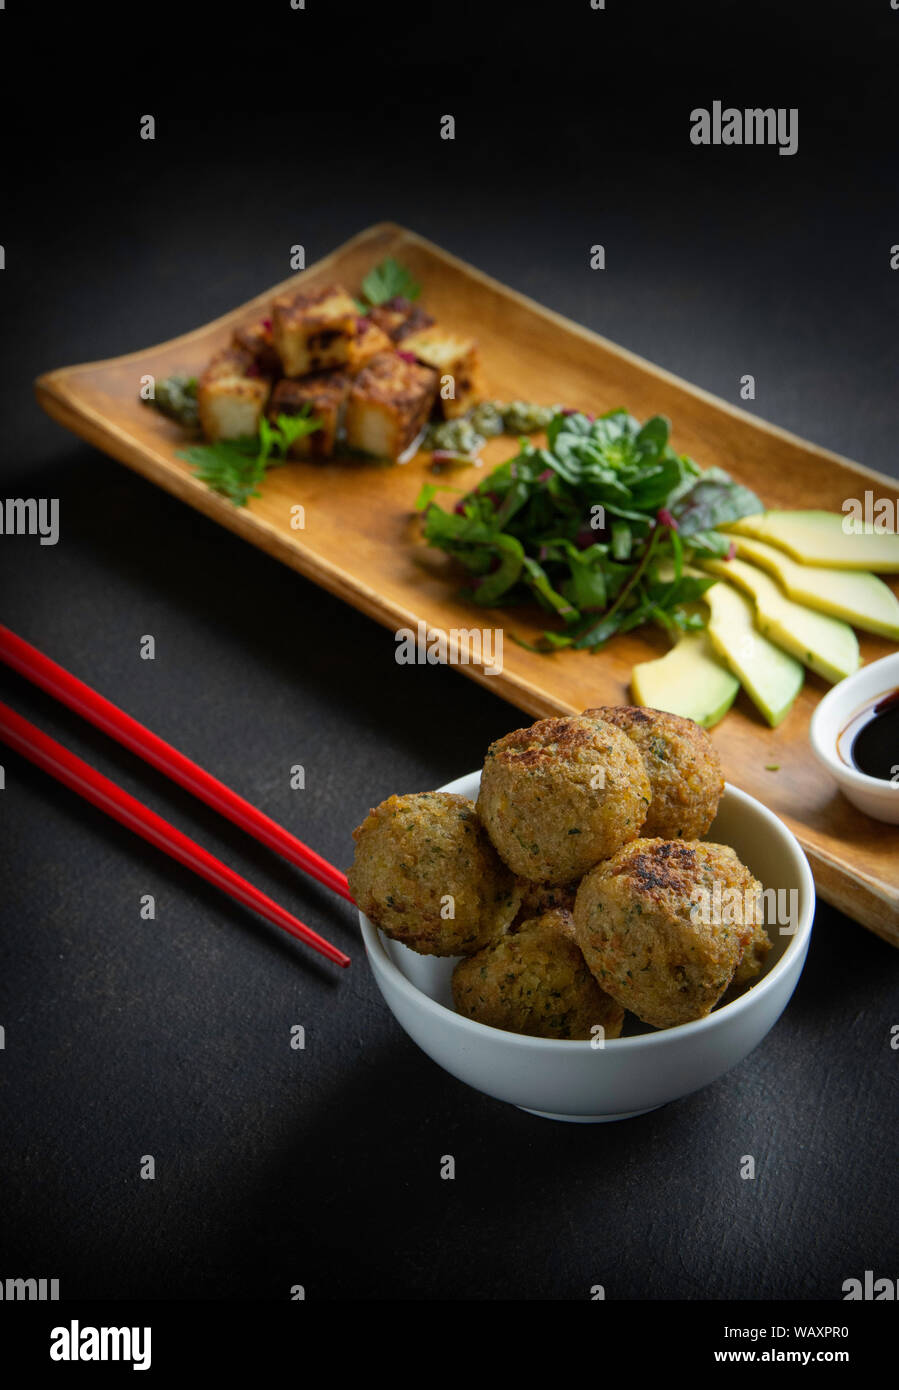 vertical photo of tofu with falafel, vegetables on dish of larch on black background with chopsticks Stock Photo